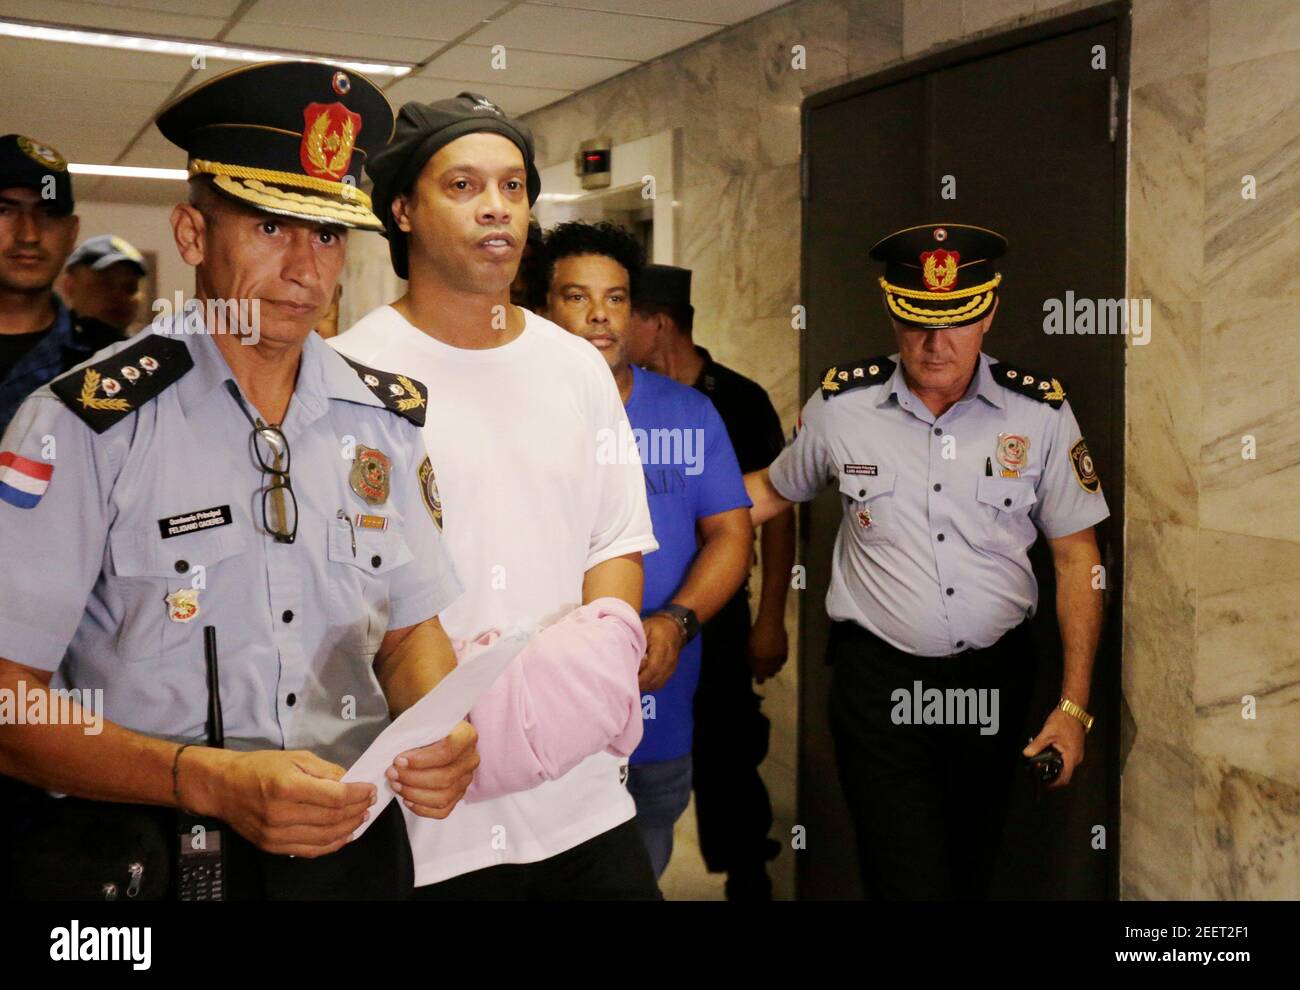 Judge rules Ronaldinho must remain in Paraguayan jail - Paraguayan Supreme Court, Asuncion, Paraguay - March 7, 2020? Ronaldinho and his brother Roberto de Asis handcuffed and escorted by police at the Supreme Court of Paraguay?REUTERS/Jorge Adorno Stock Photo